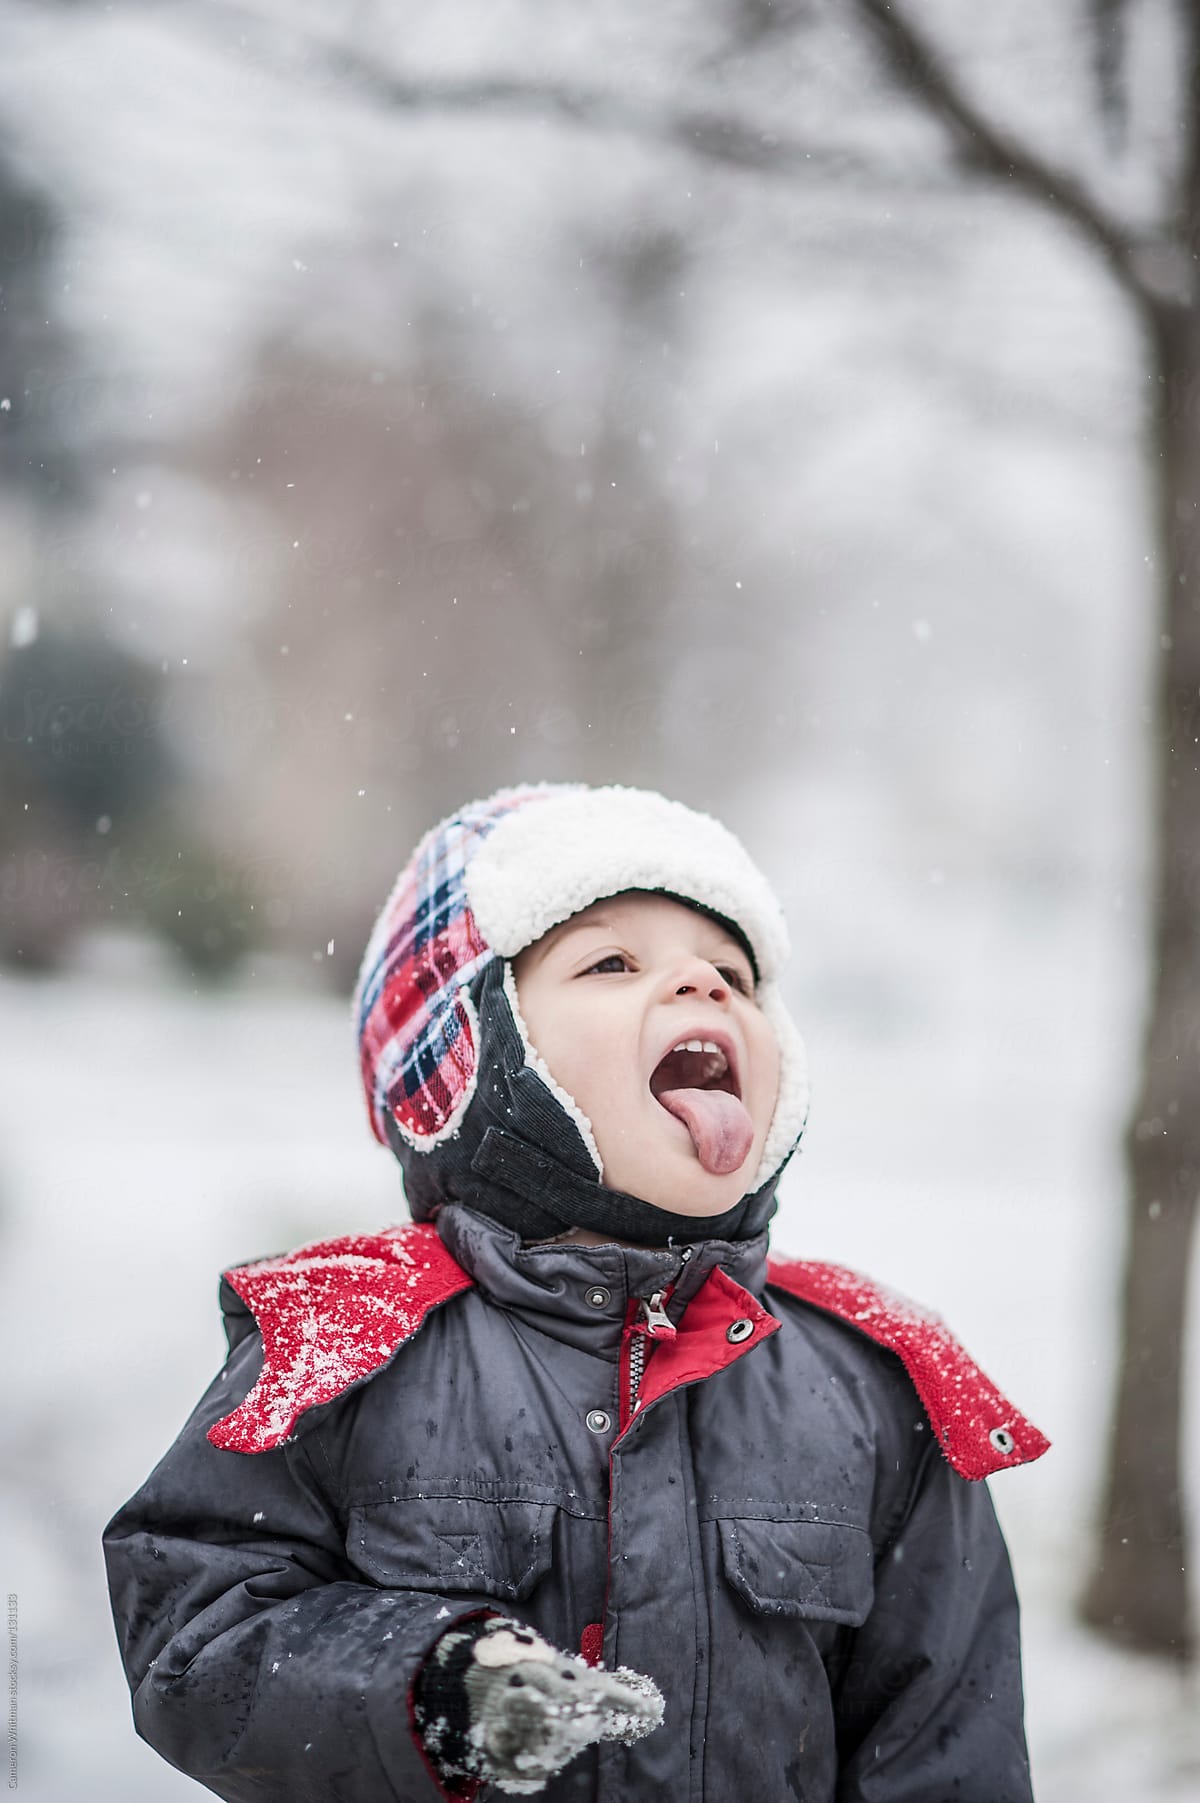 Catching snowflakes on his tongue